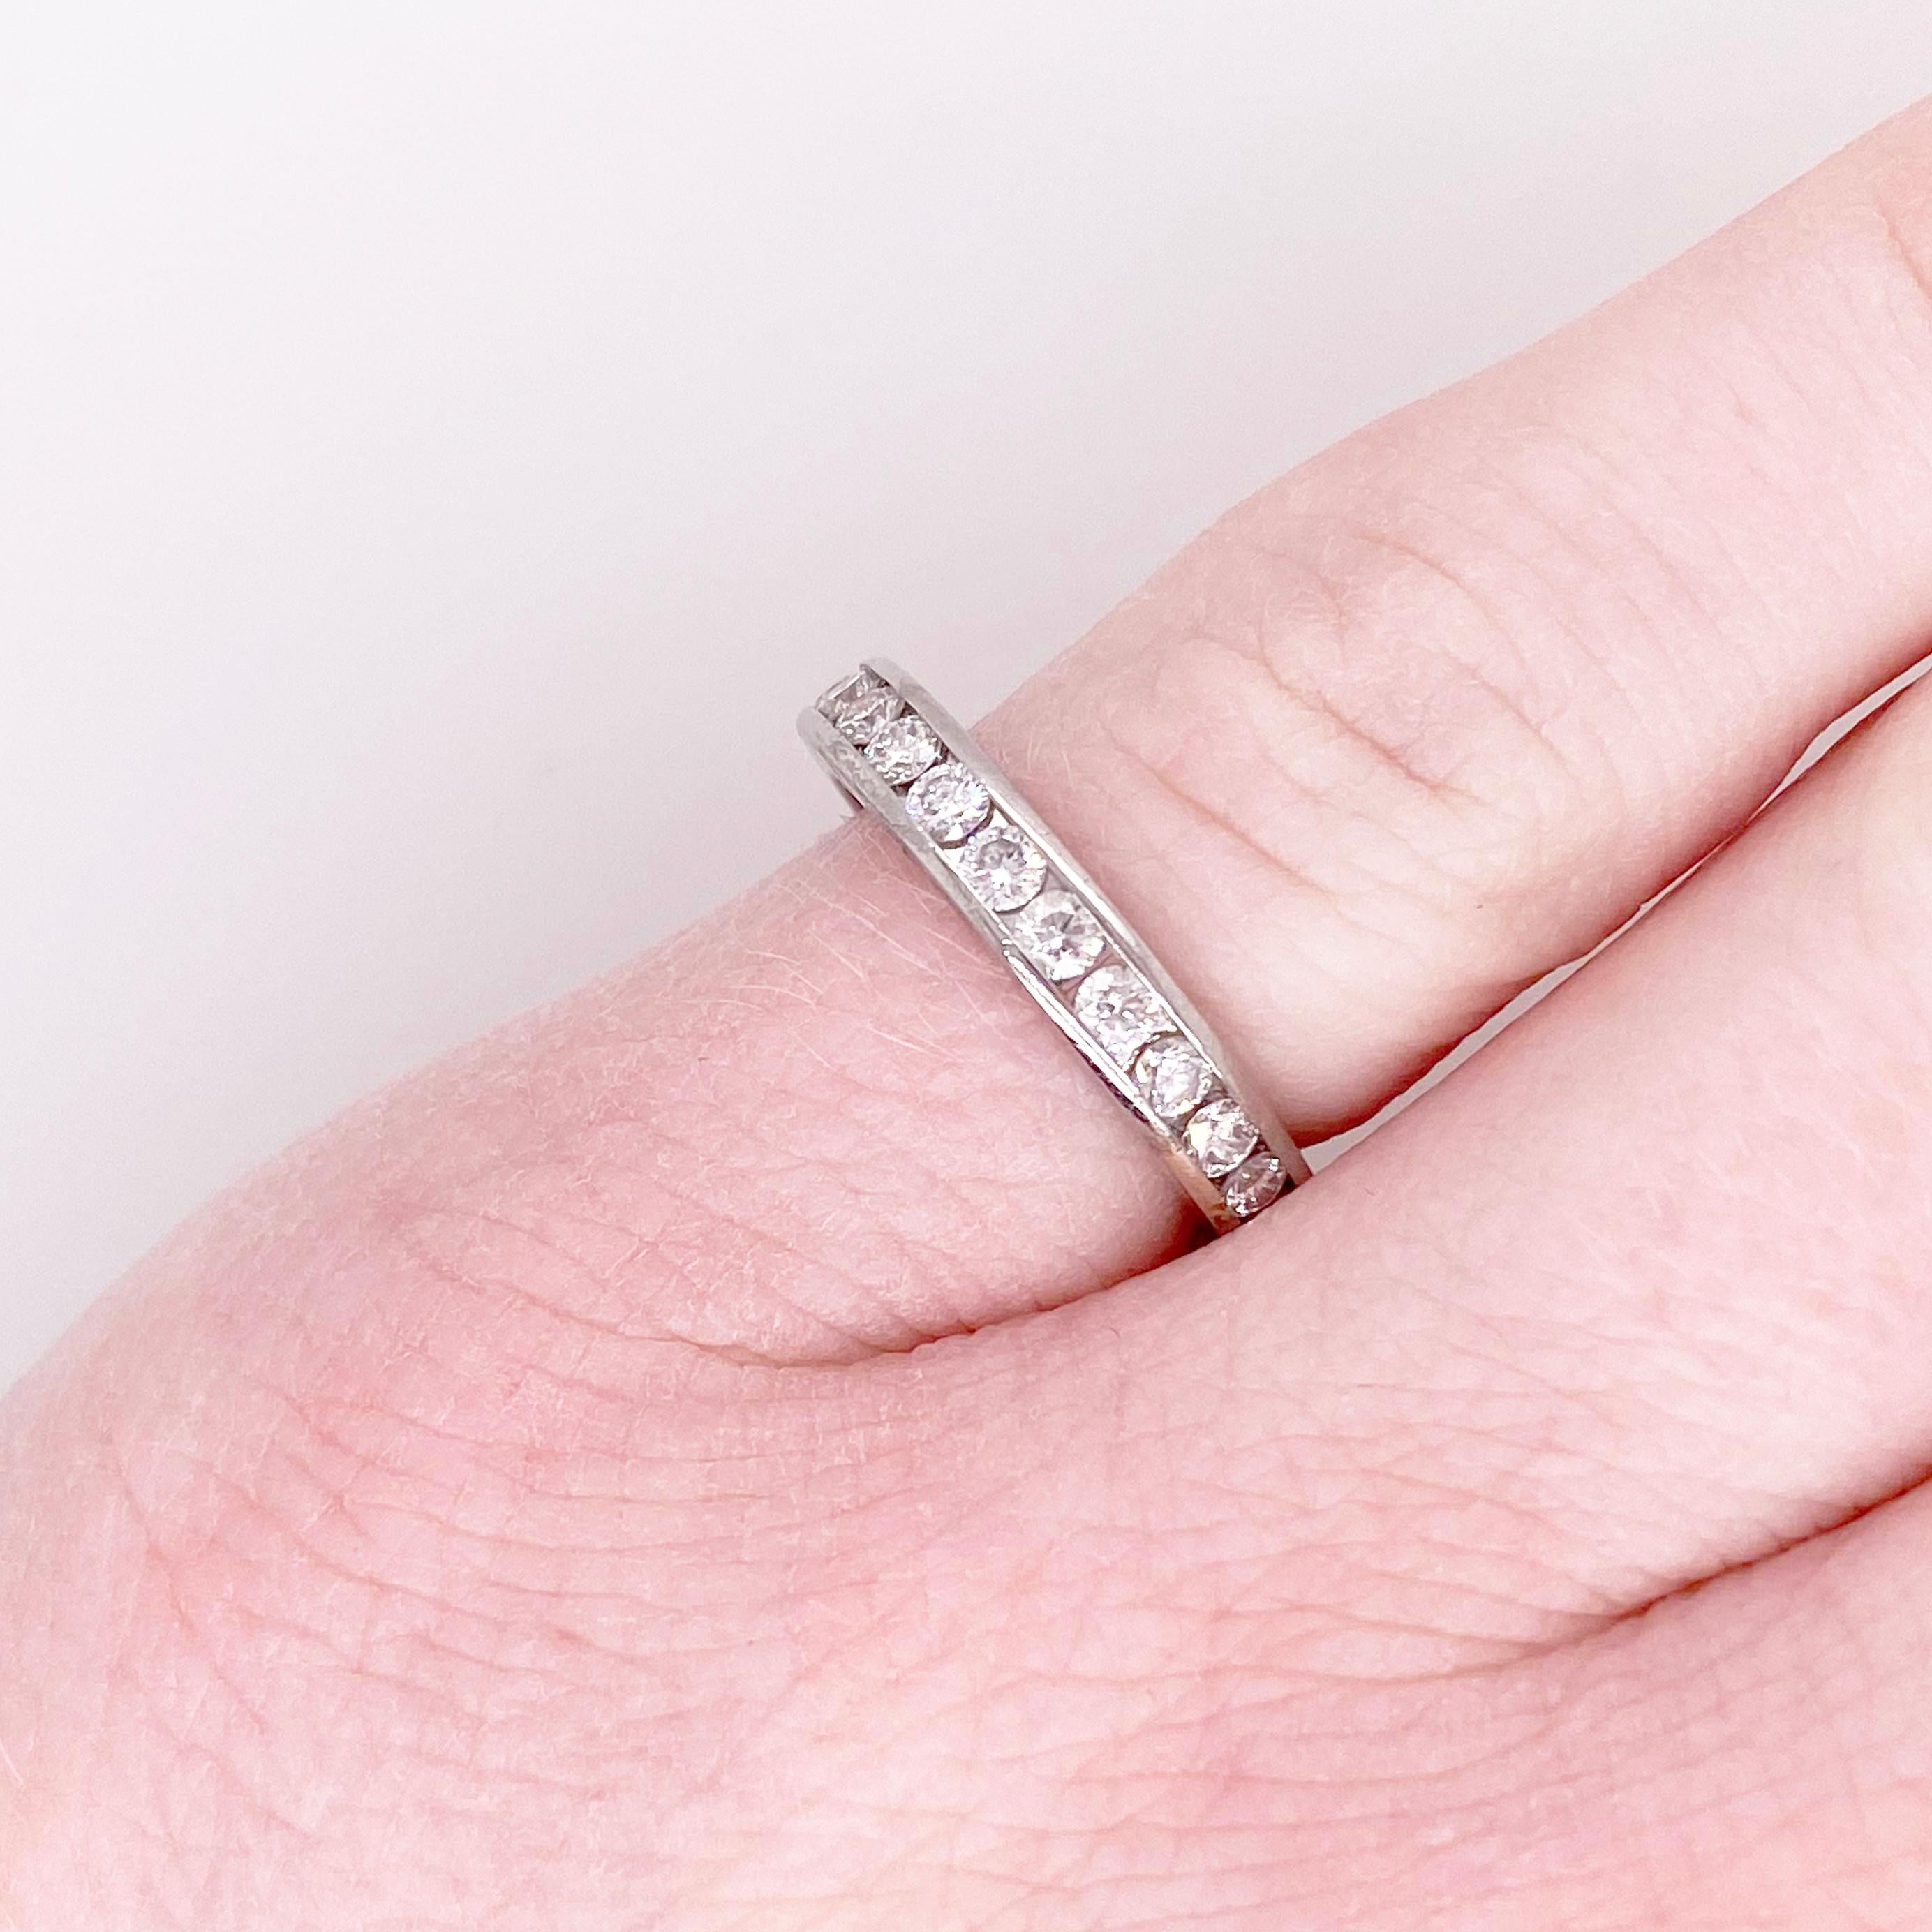 This stunning 14k white gold band dripping with diamonds is sure to take your breath away! This ring provides a look that is very modern yet classic. This ring is very fashionable and can add a touch of style to any outfit, yet it is also classy